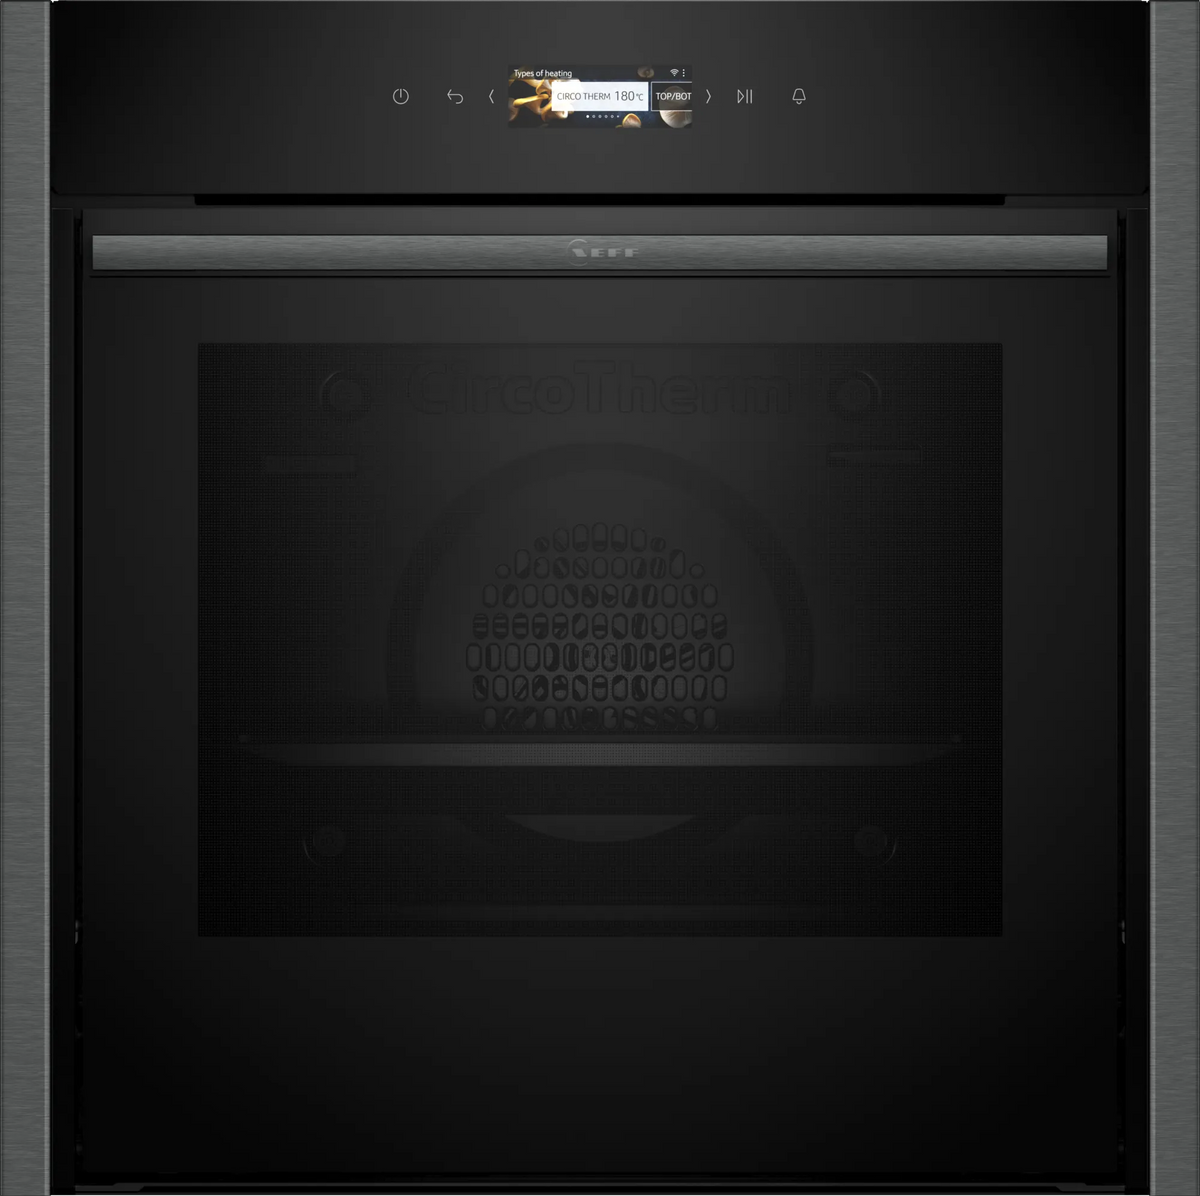 Neff N70 71L Built-In Electric Single Oven - Graphite Grey | B54CR31G0B from Neff - DID Electrical